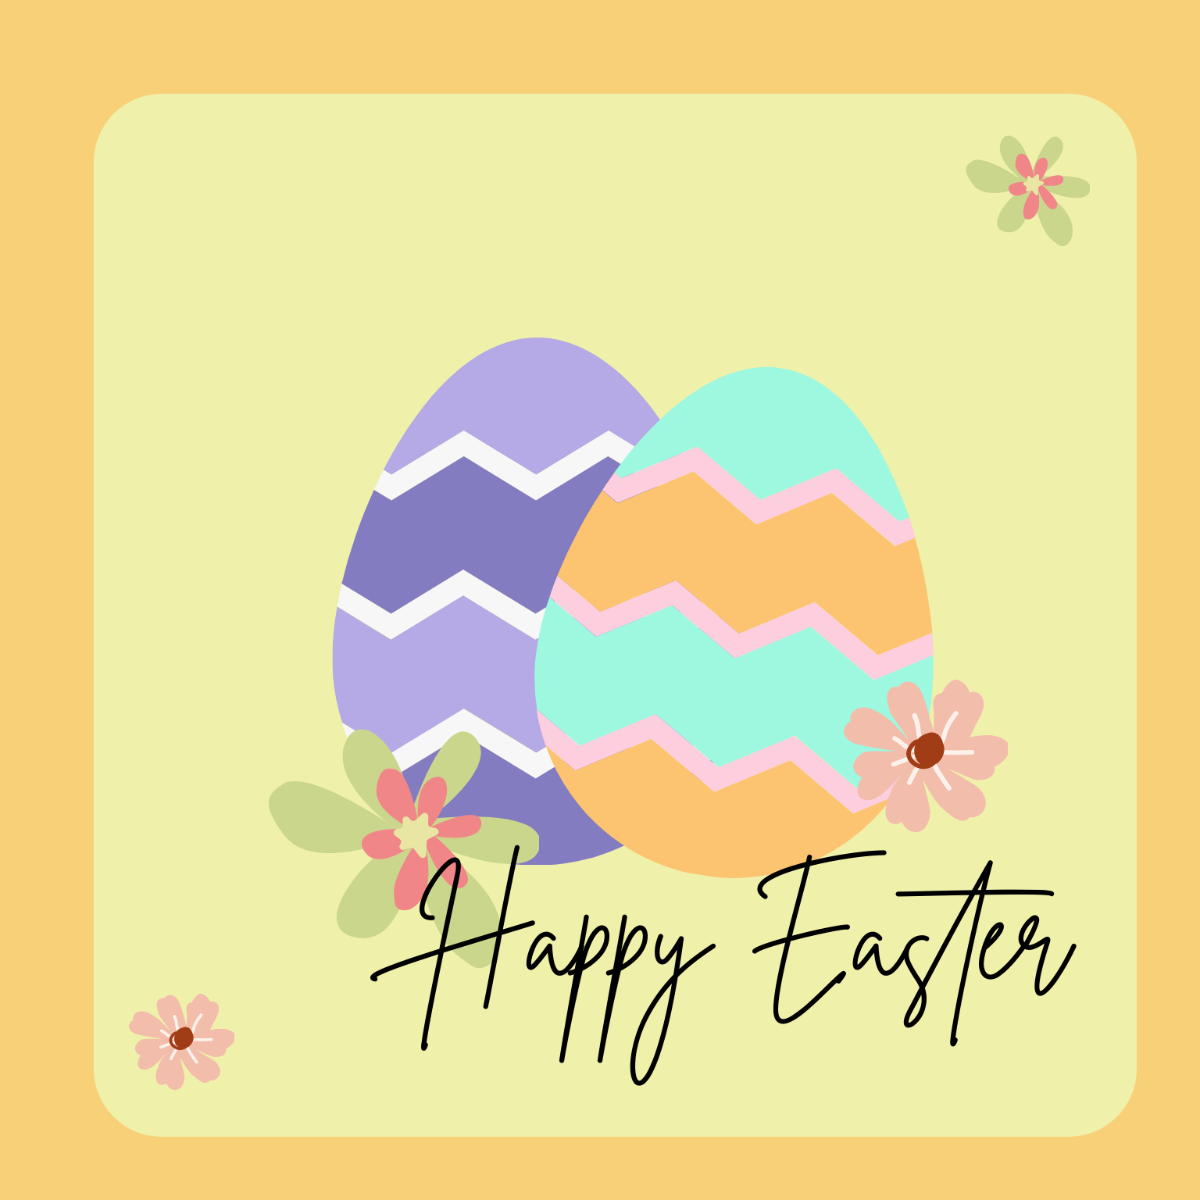 Free Easter Egg Vector Template